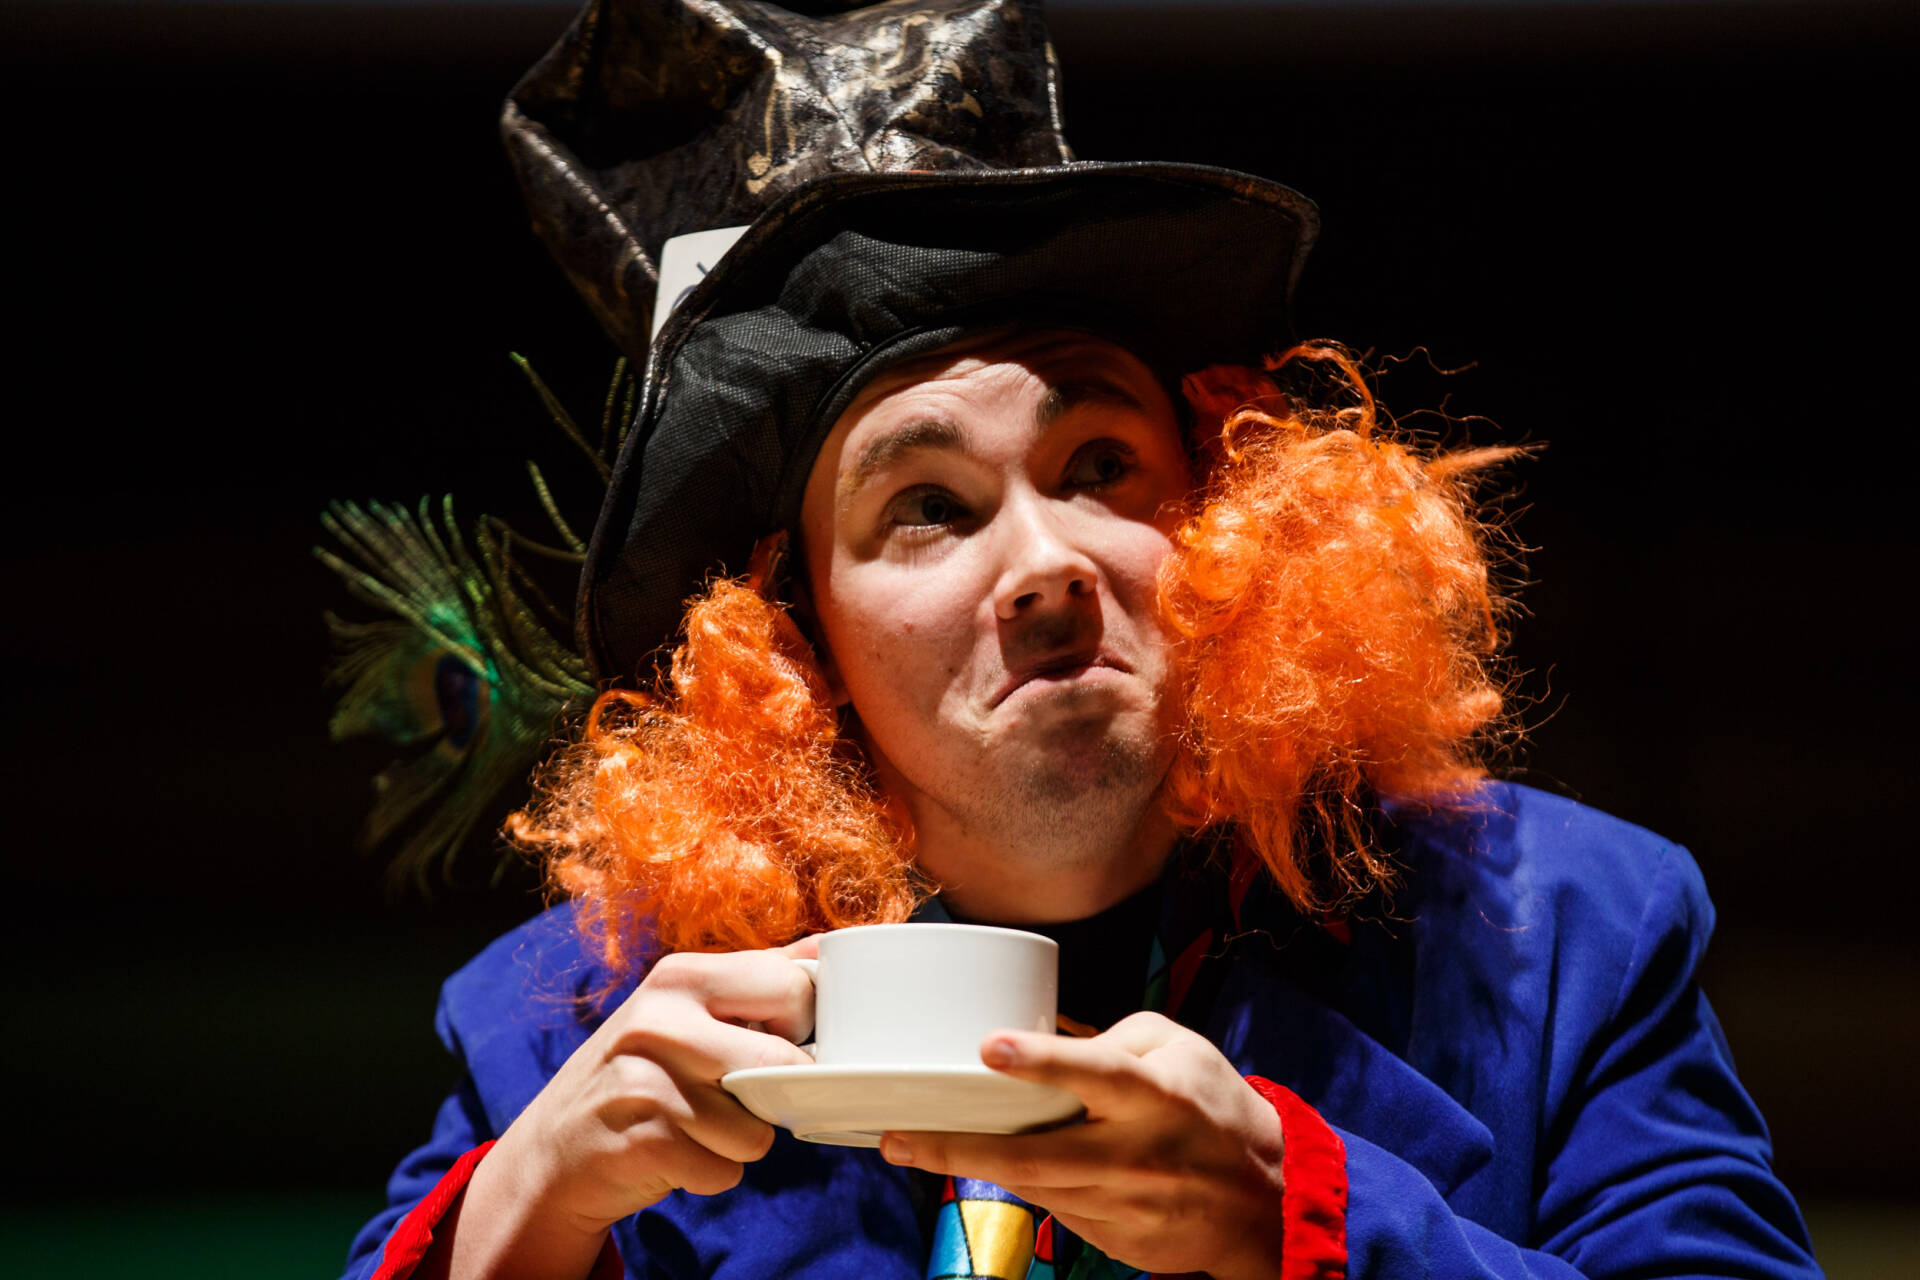 Costumed performer in top hat and orange wig holding a cup and saucer